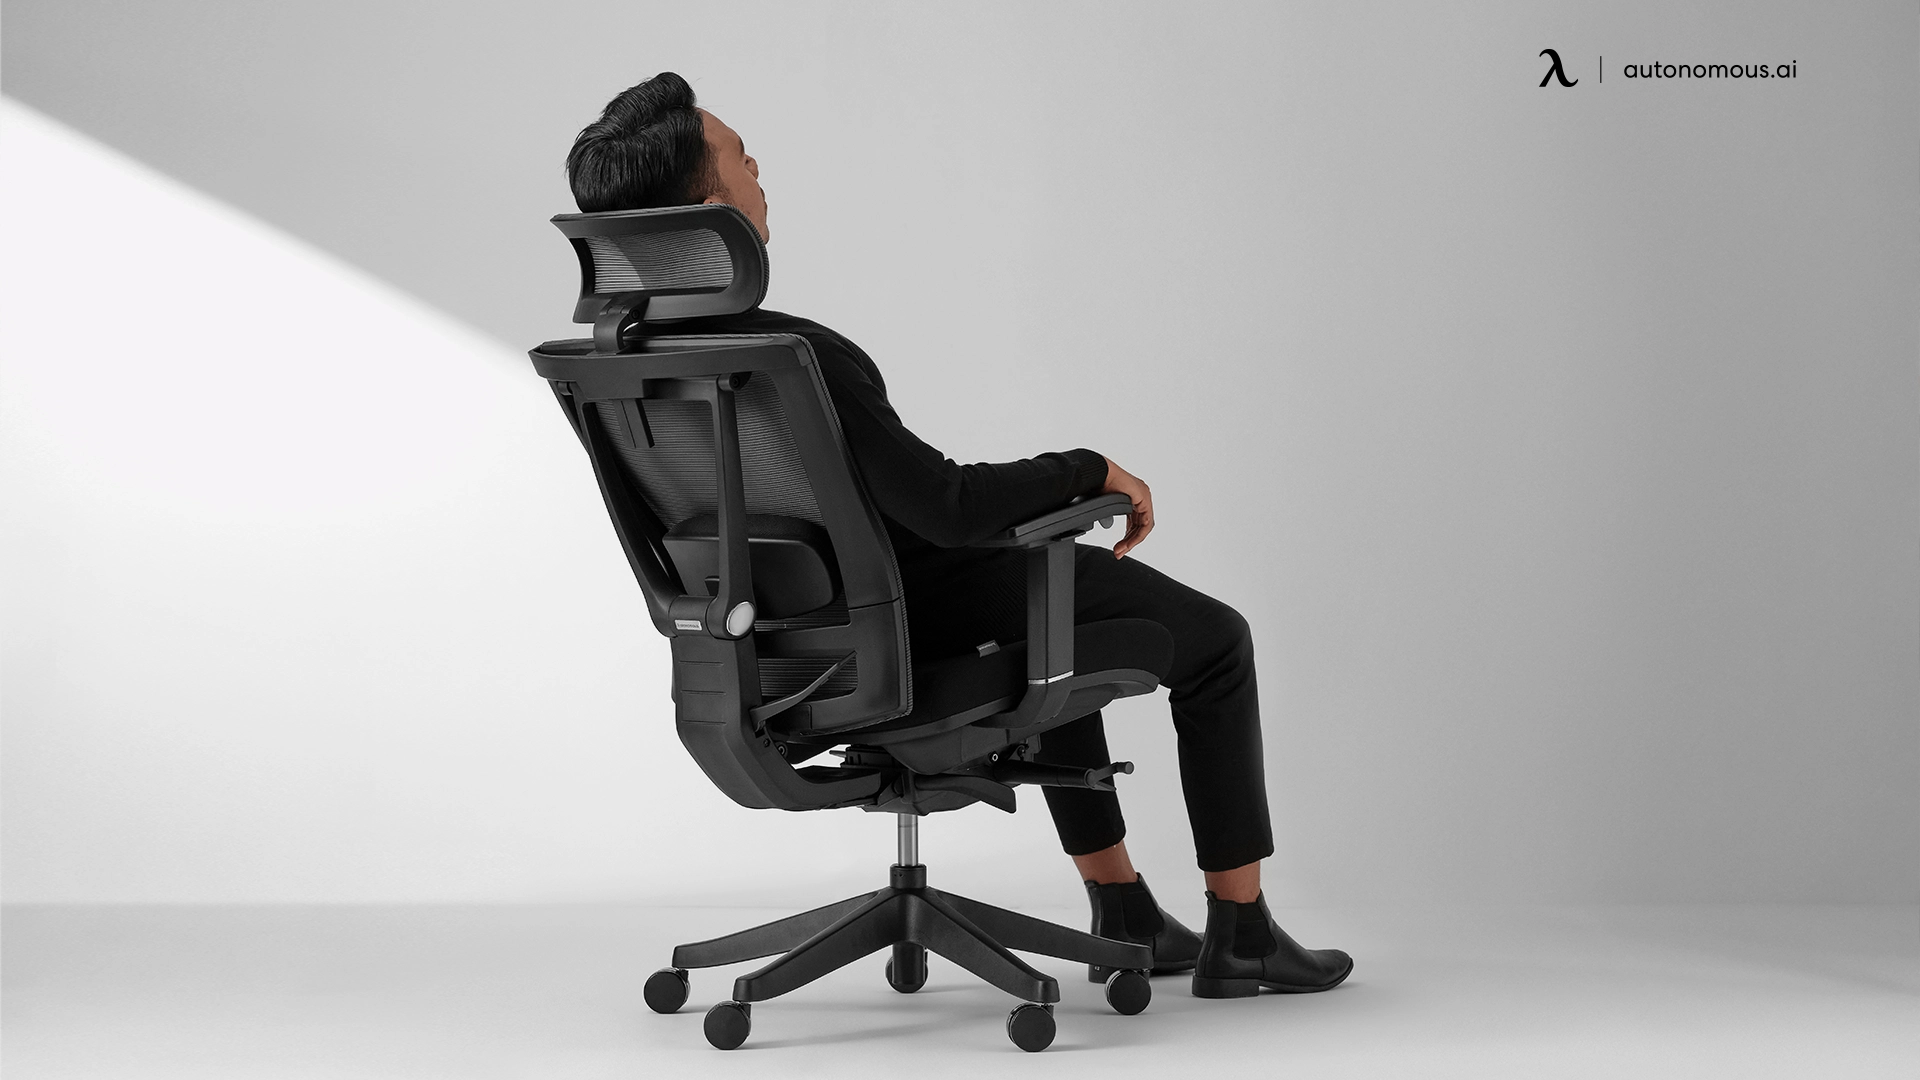 How can the design of a simple office chair impact ergonomics?